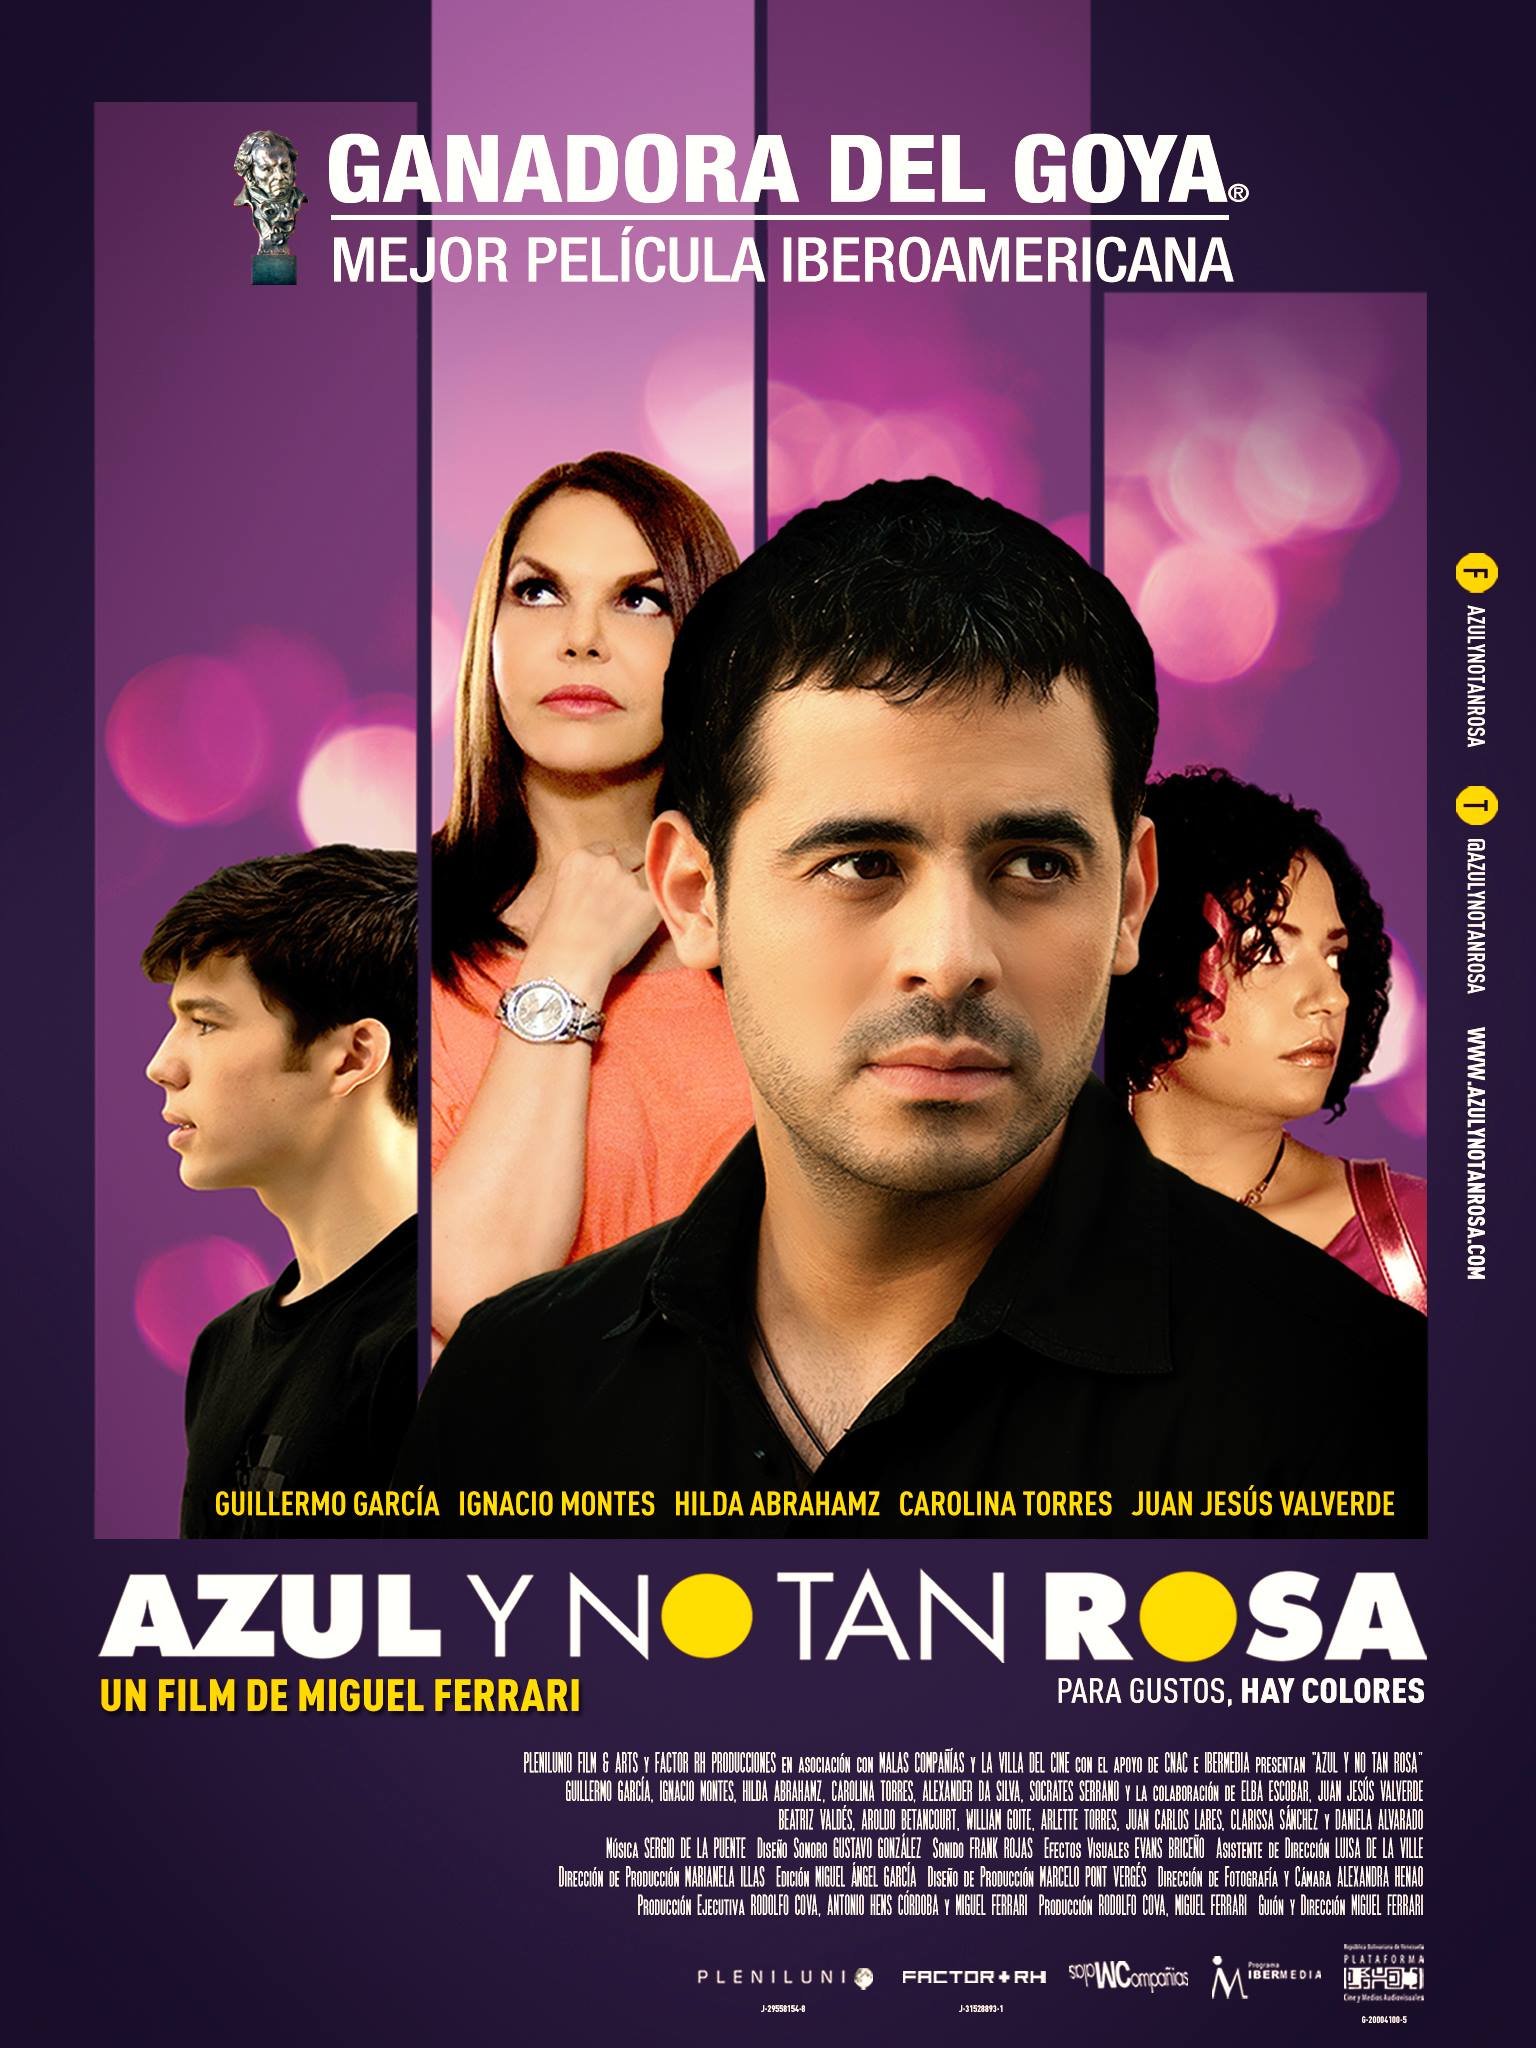 Spanish poster of the movie Azul y no tan rosa